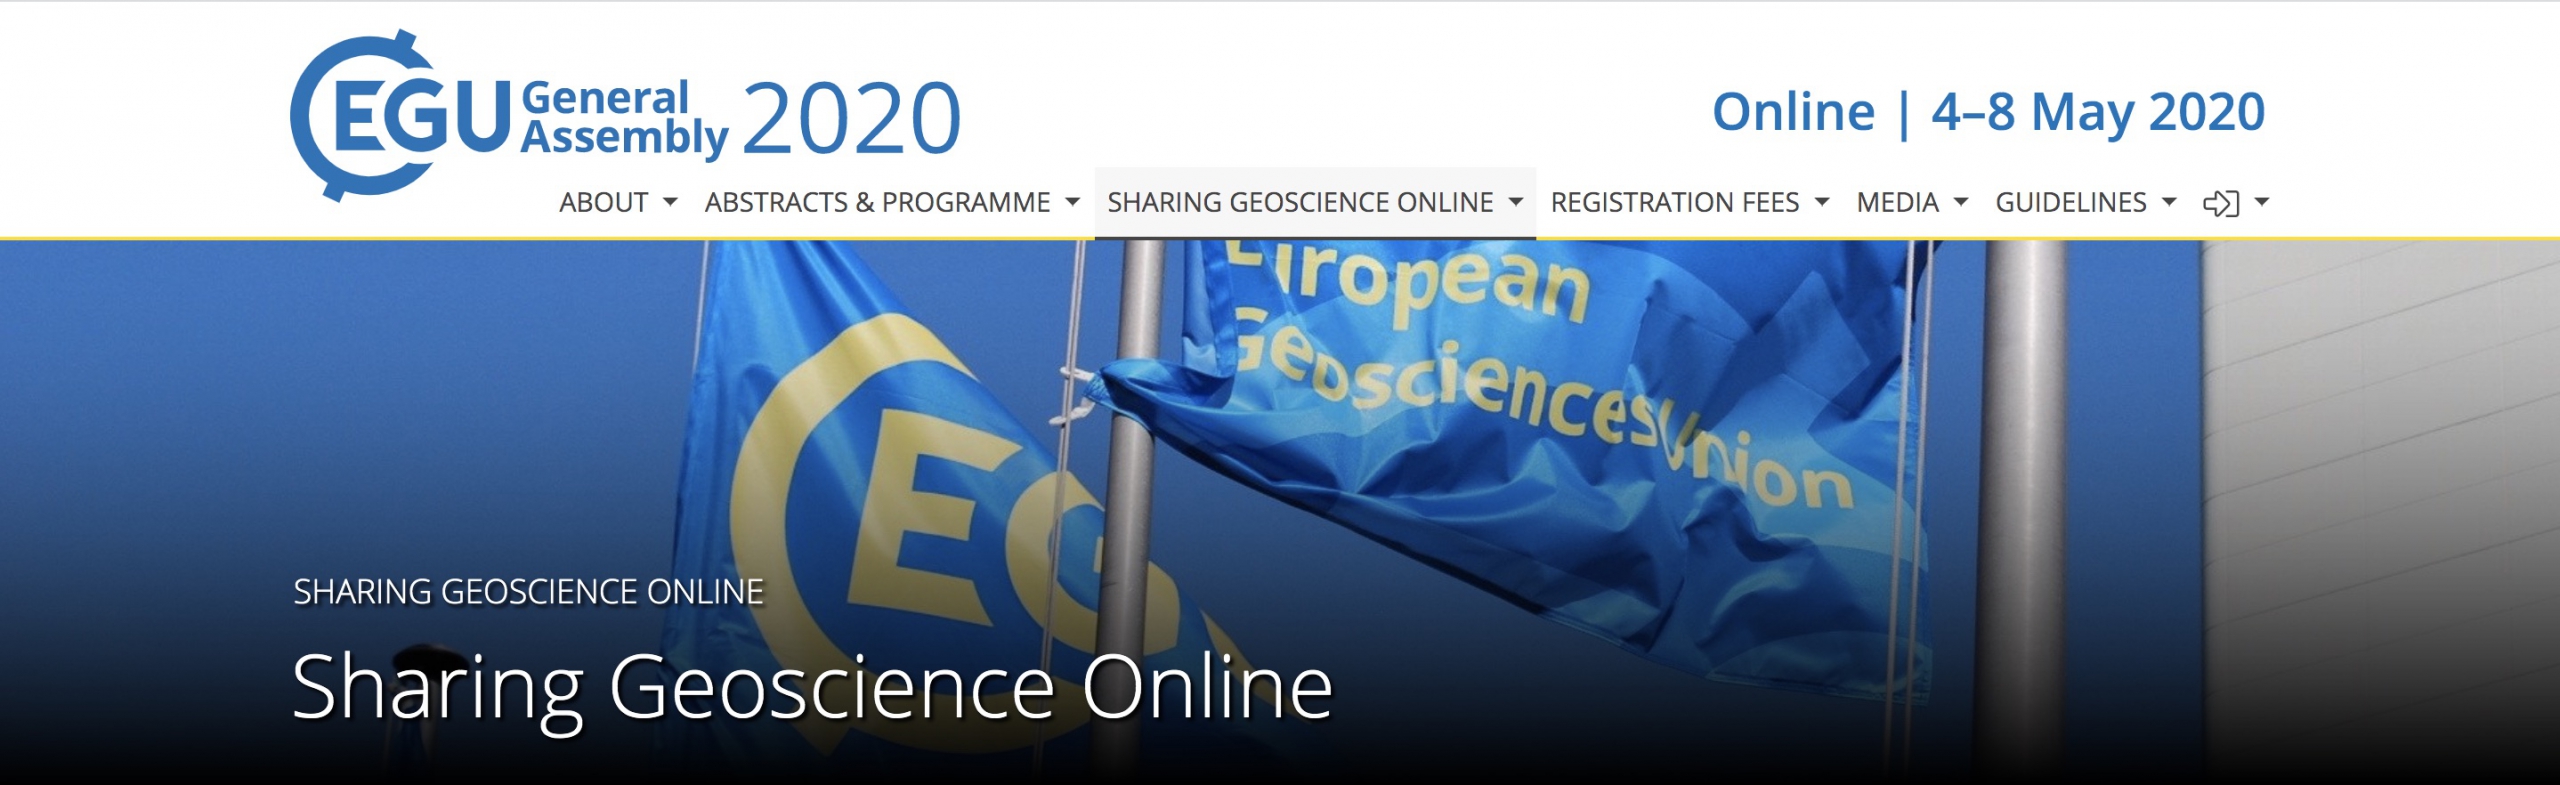 The CMCC Foundation at EGU2020: Sharing Geoscience Online